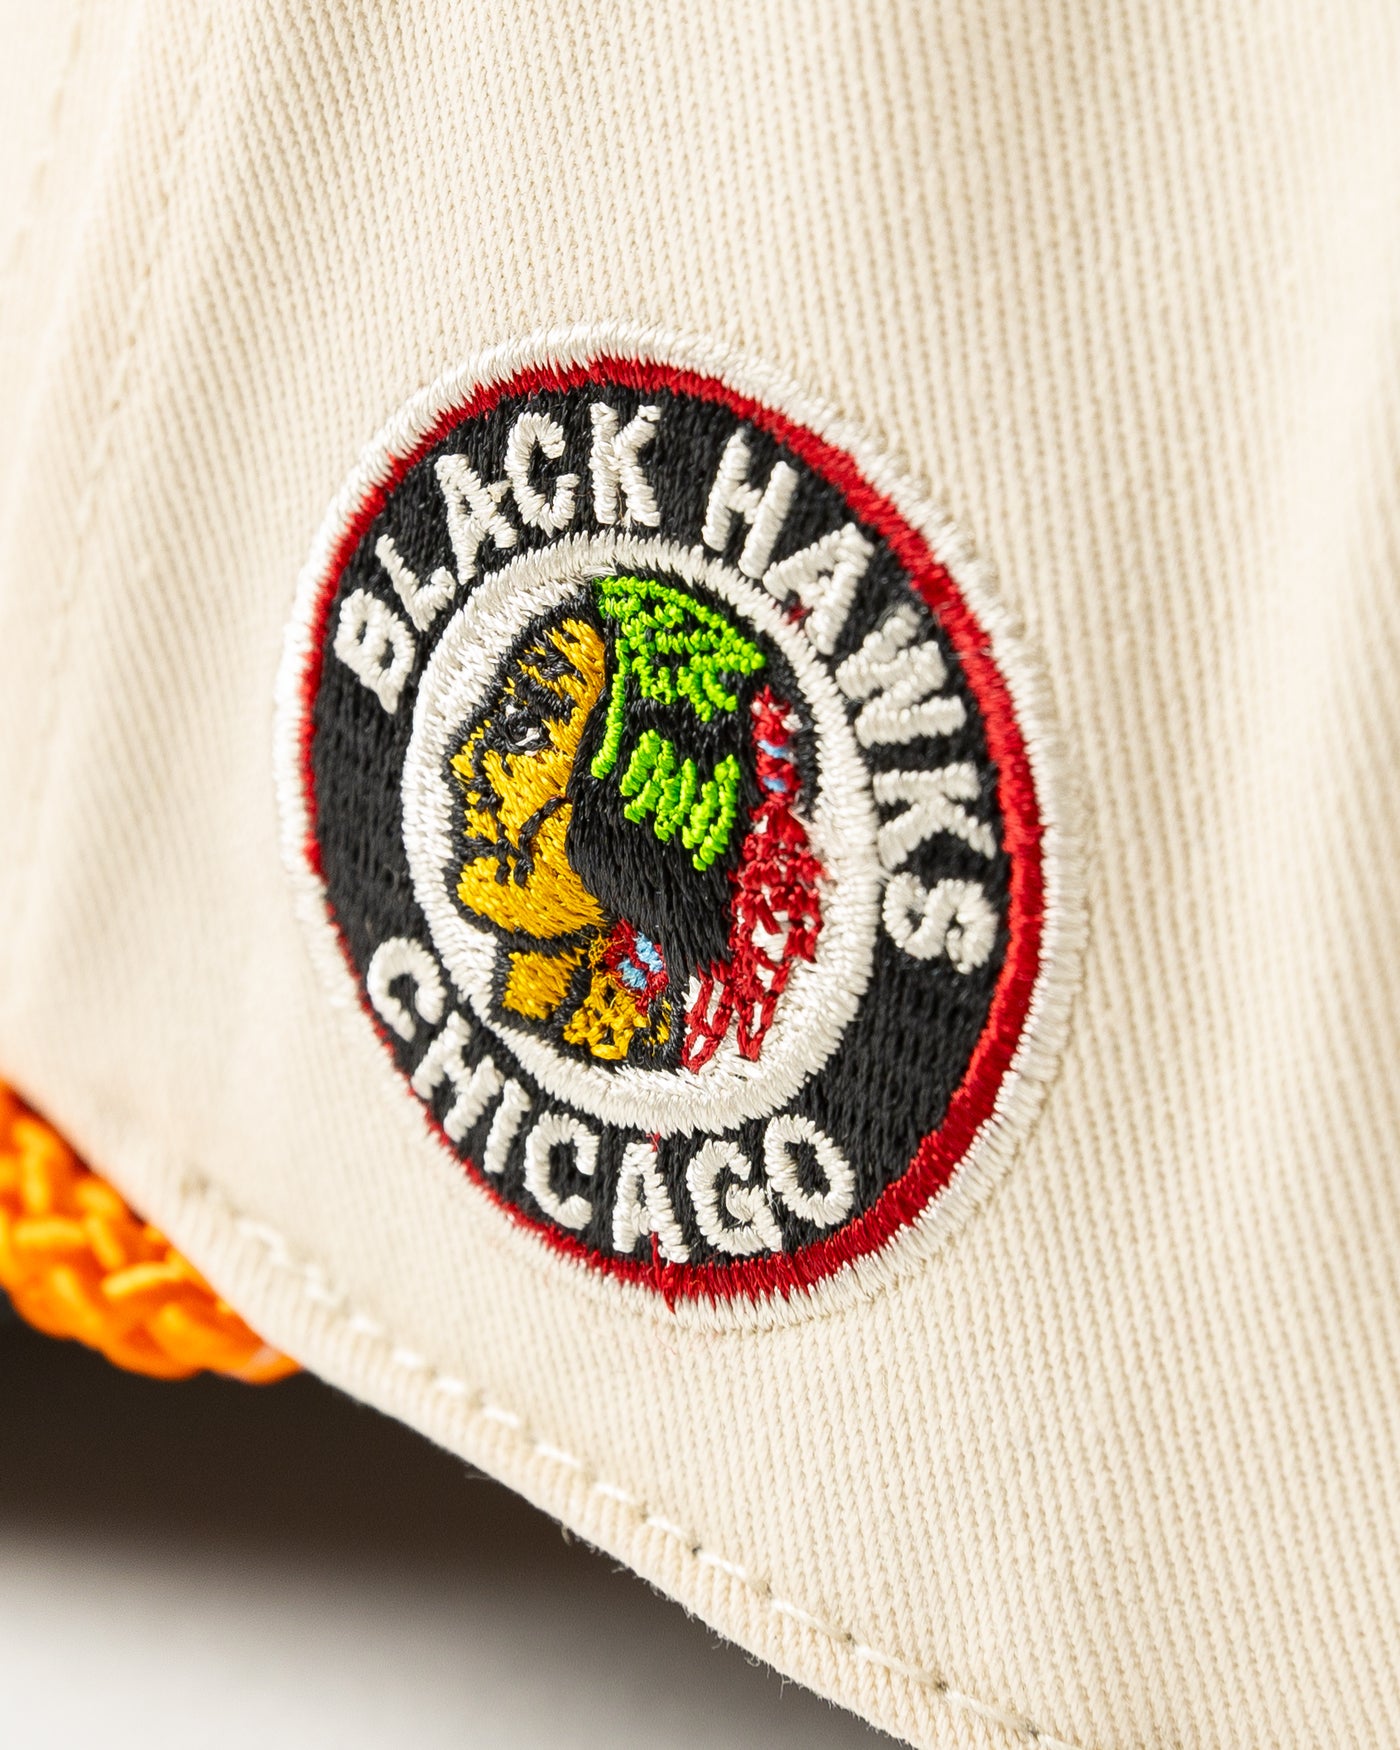 beige, black and orange snapback rope hat with Original Six hockey word graphic across front and vintage Chicago Blackhawks logo embroidered on left side - side detail lay flat